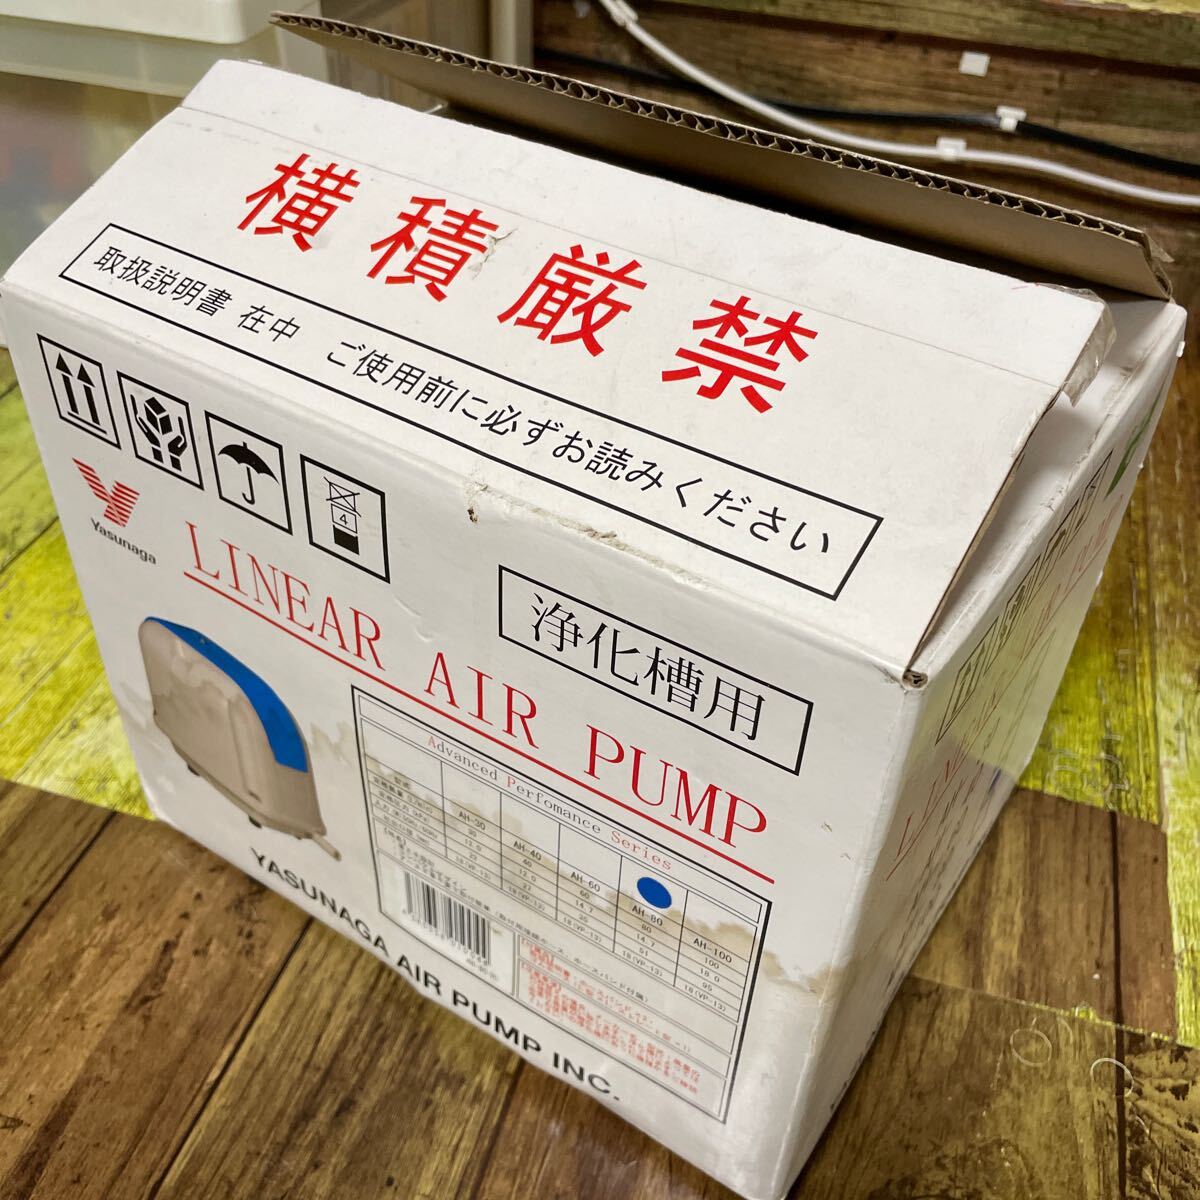 [ new goods unused goods long-term storage therefore operation verification did therefore breaking the seal did.] cheap .AH-80- air flow 80 air pump energy conservation ... blower air pump 